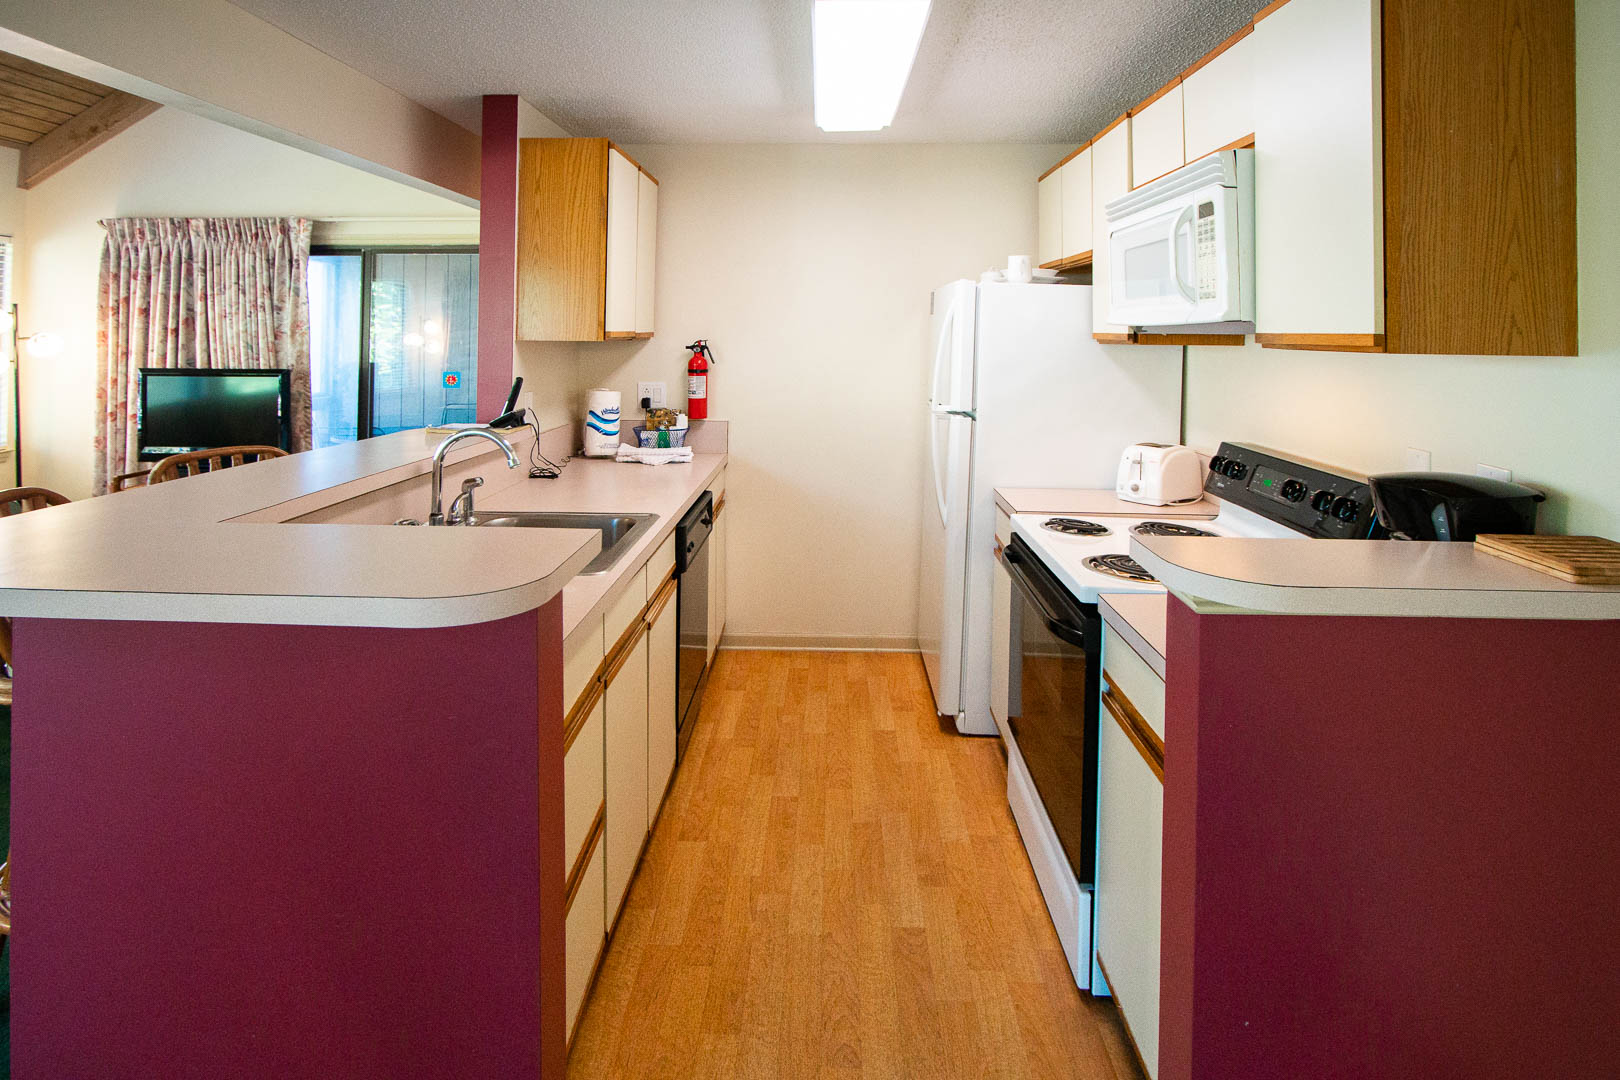 A fully equipped kitchen at VRI's Sandcastle Cove in New Bern, North Carolina.